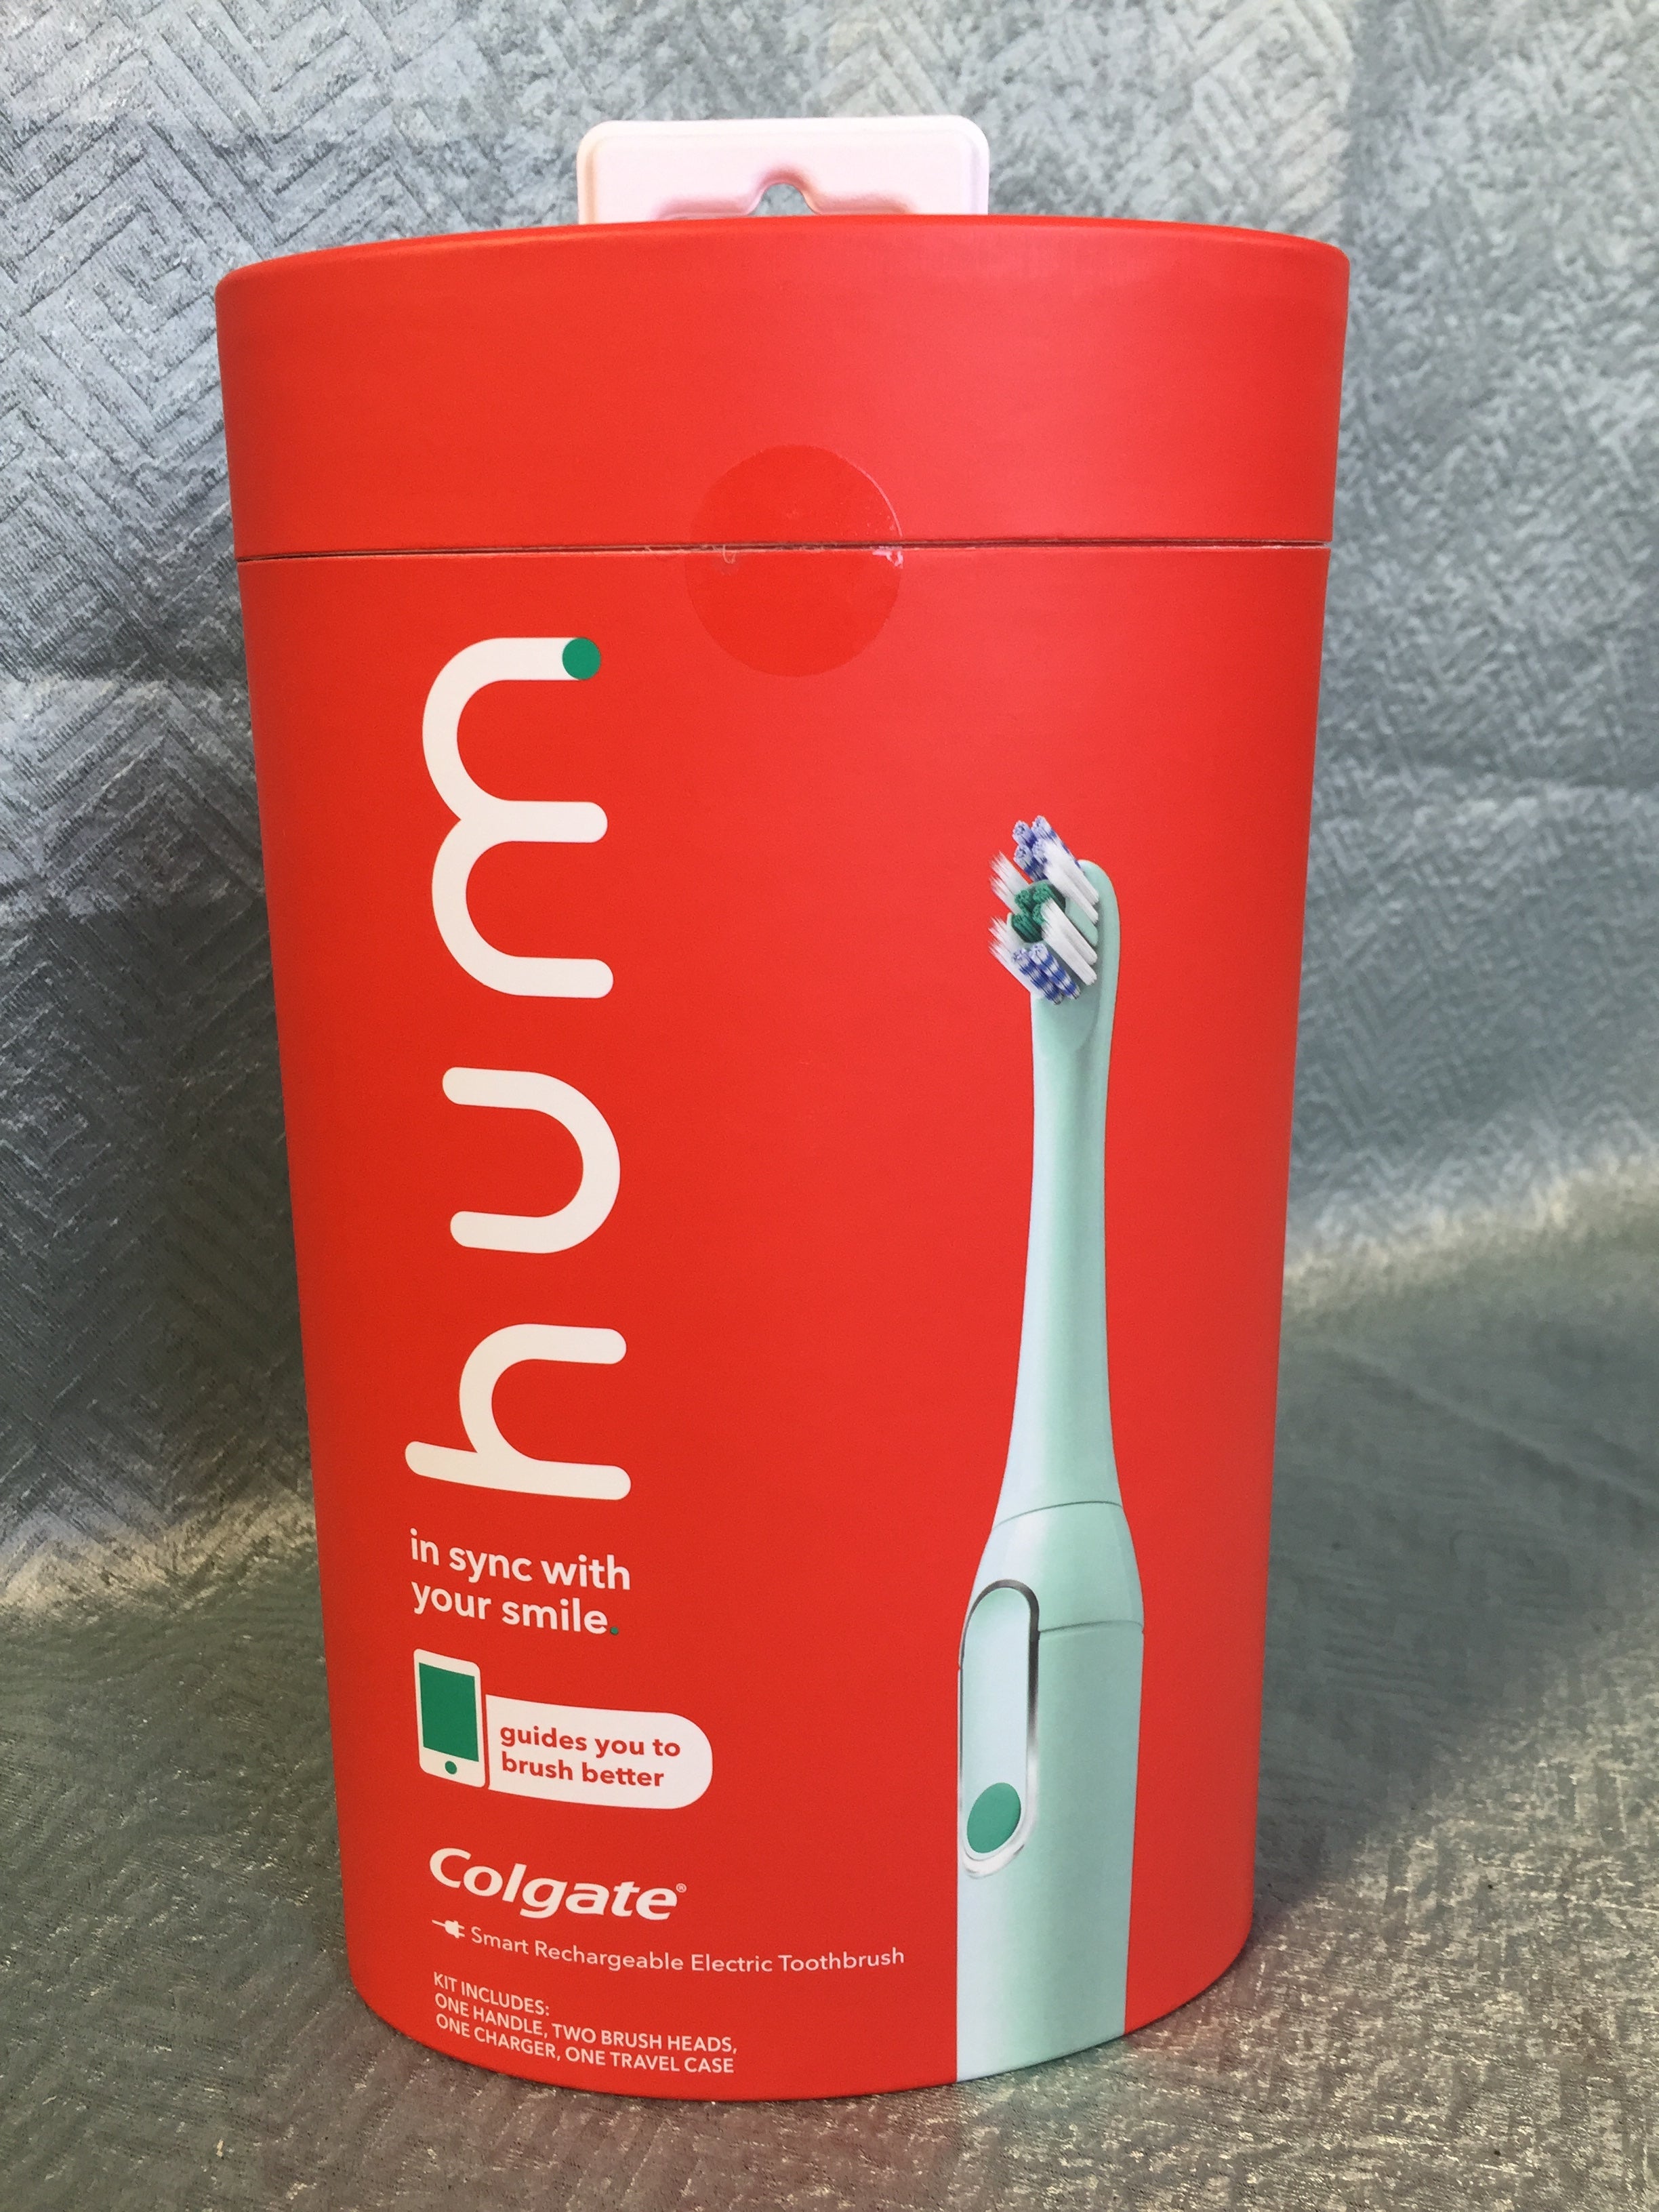 hum by Colgate Smart Battery Toothbrush Kit, Sonic Toothbrush - Teal (7517438935278)